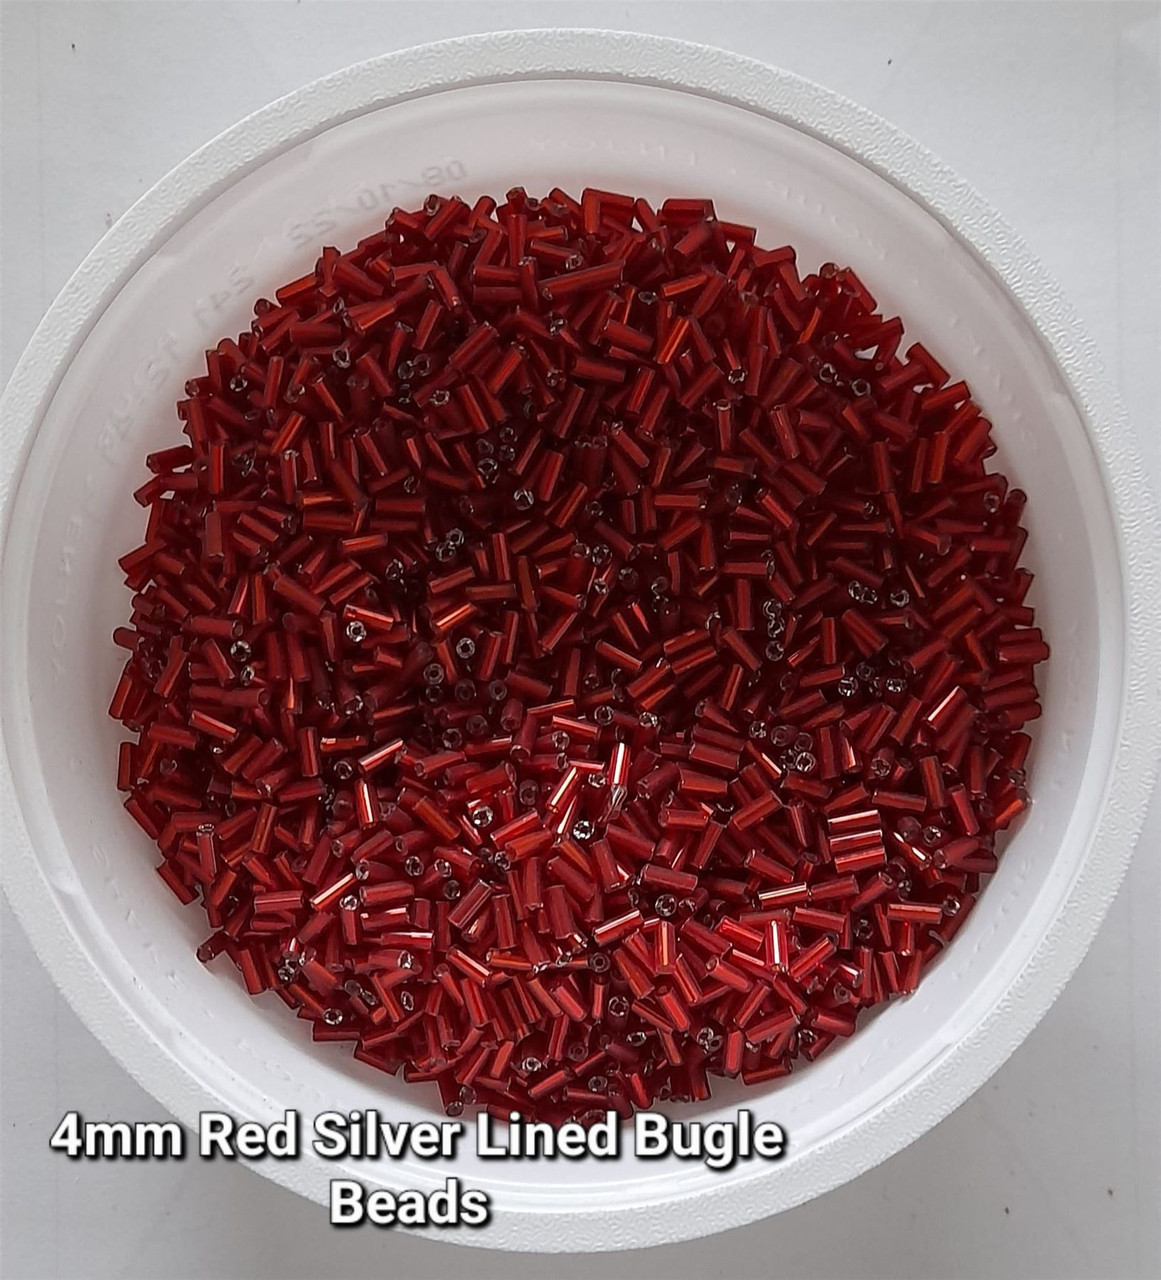 50g glass bugle beads - Red Silver-Lined - approx 4mm